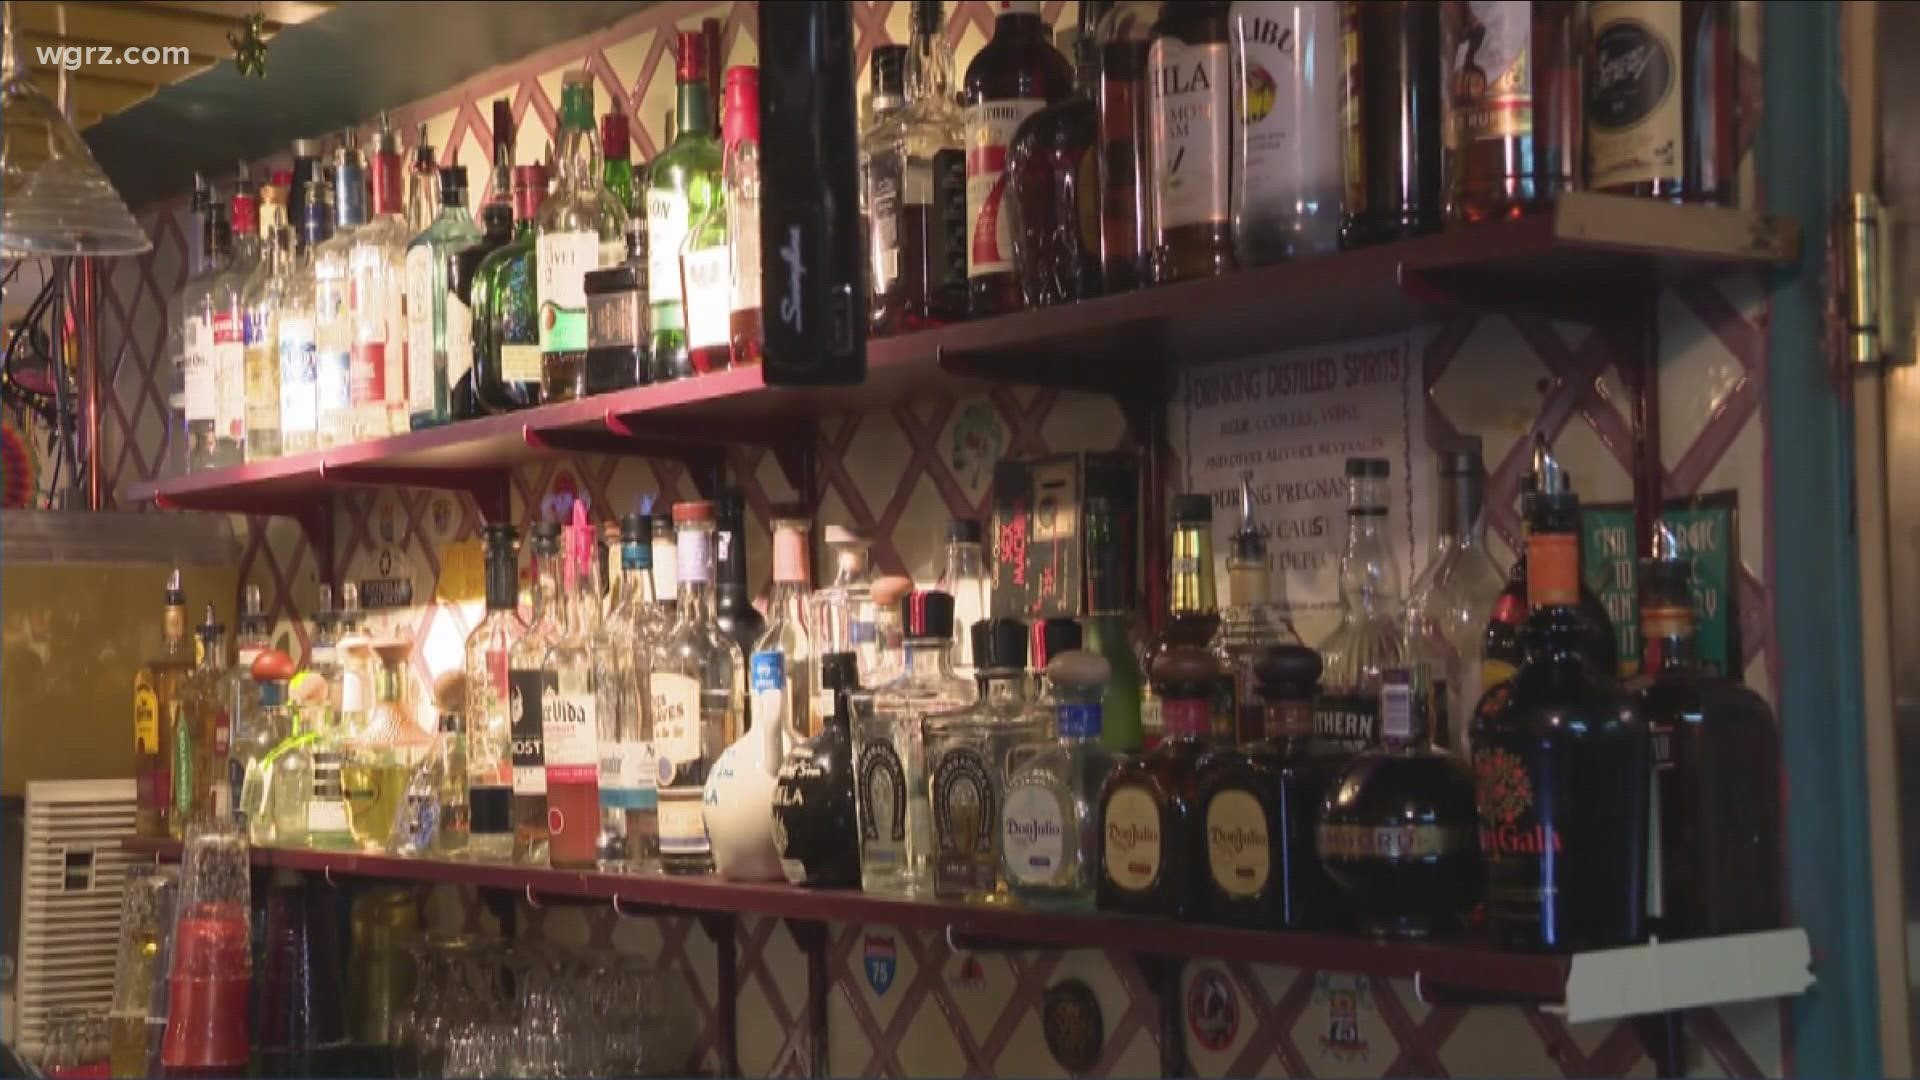 State Liquor Authority On The Alcohol To Go Policy